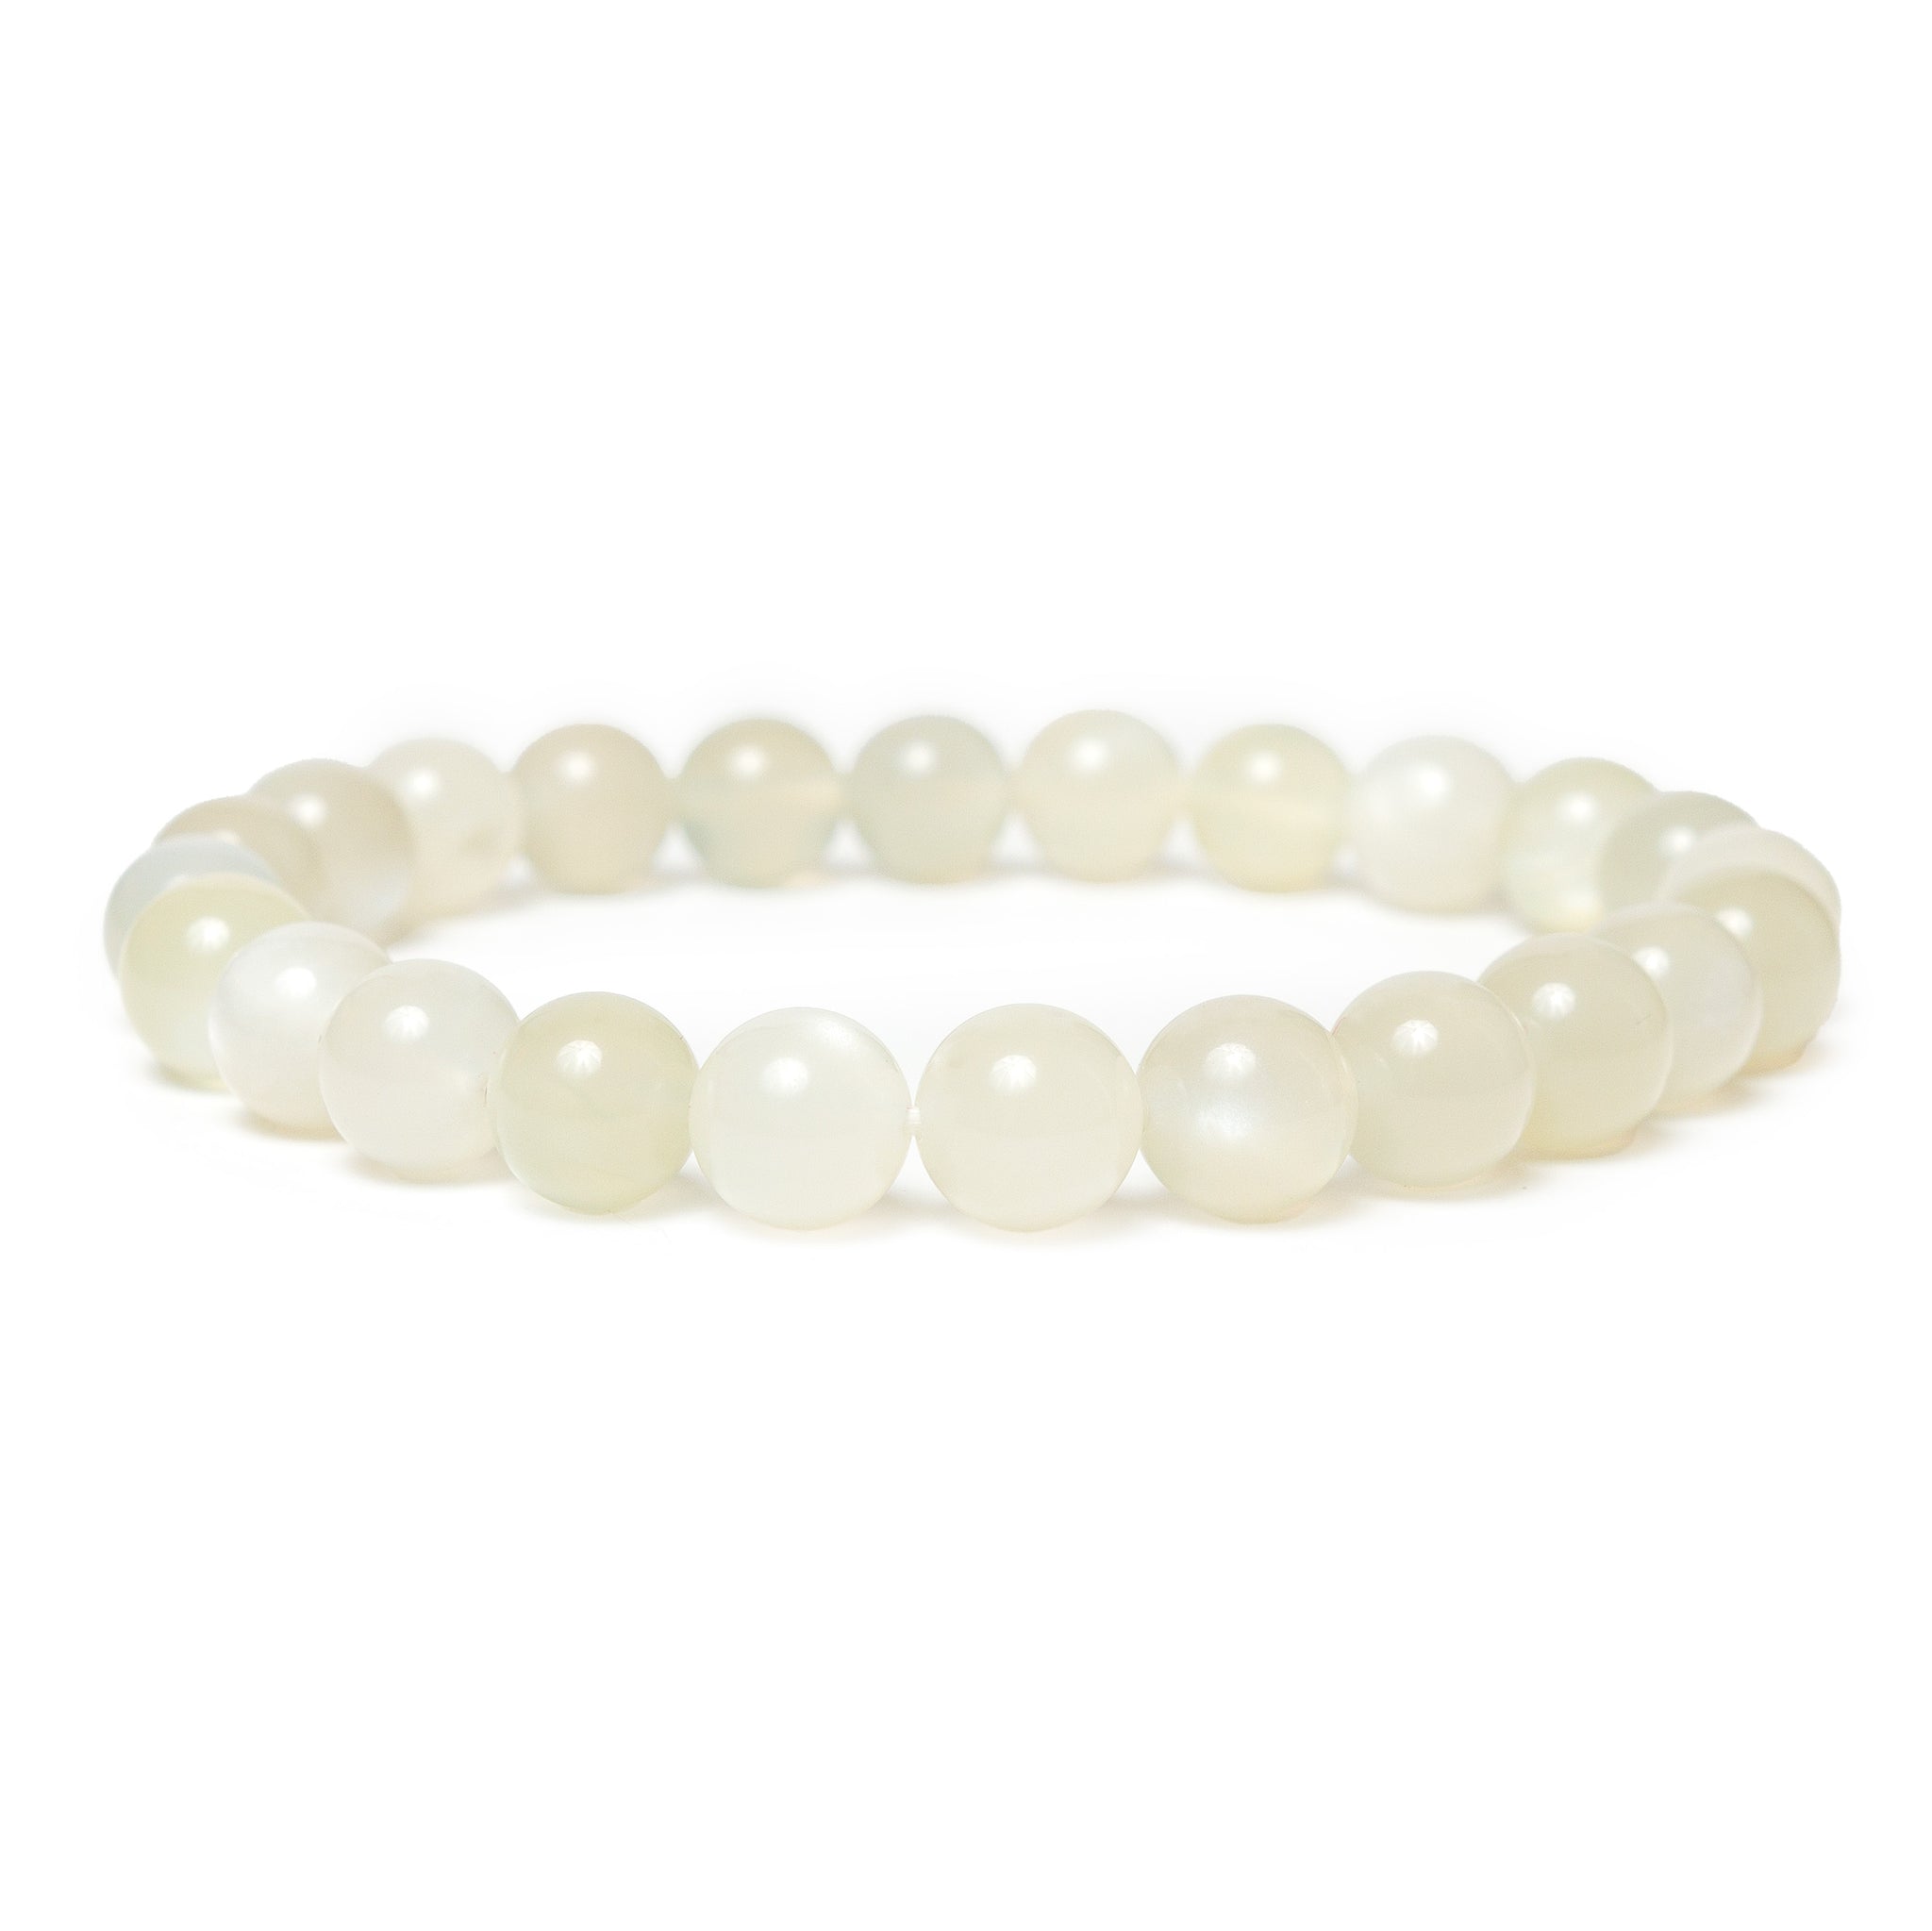 Moonstone Bracelet for Woman - The Stone of Peace and New Beginnings